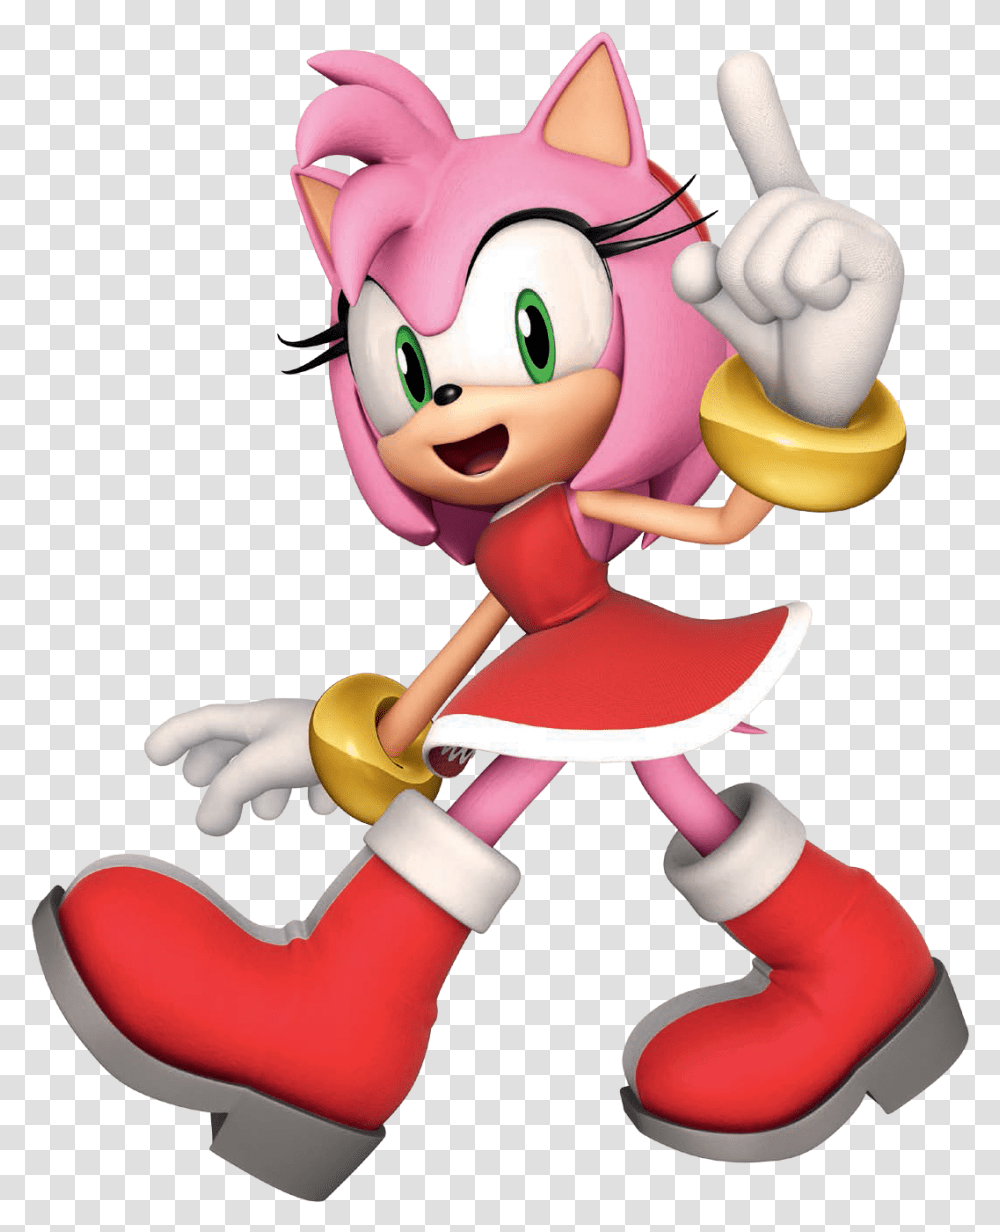 Amy Rose, Toy, Super Mario, Doll, Figurine Transparent Png